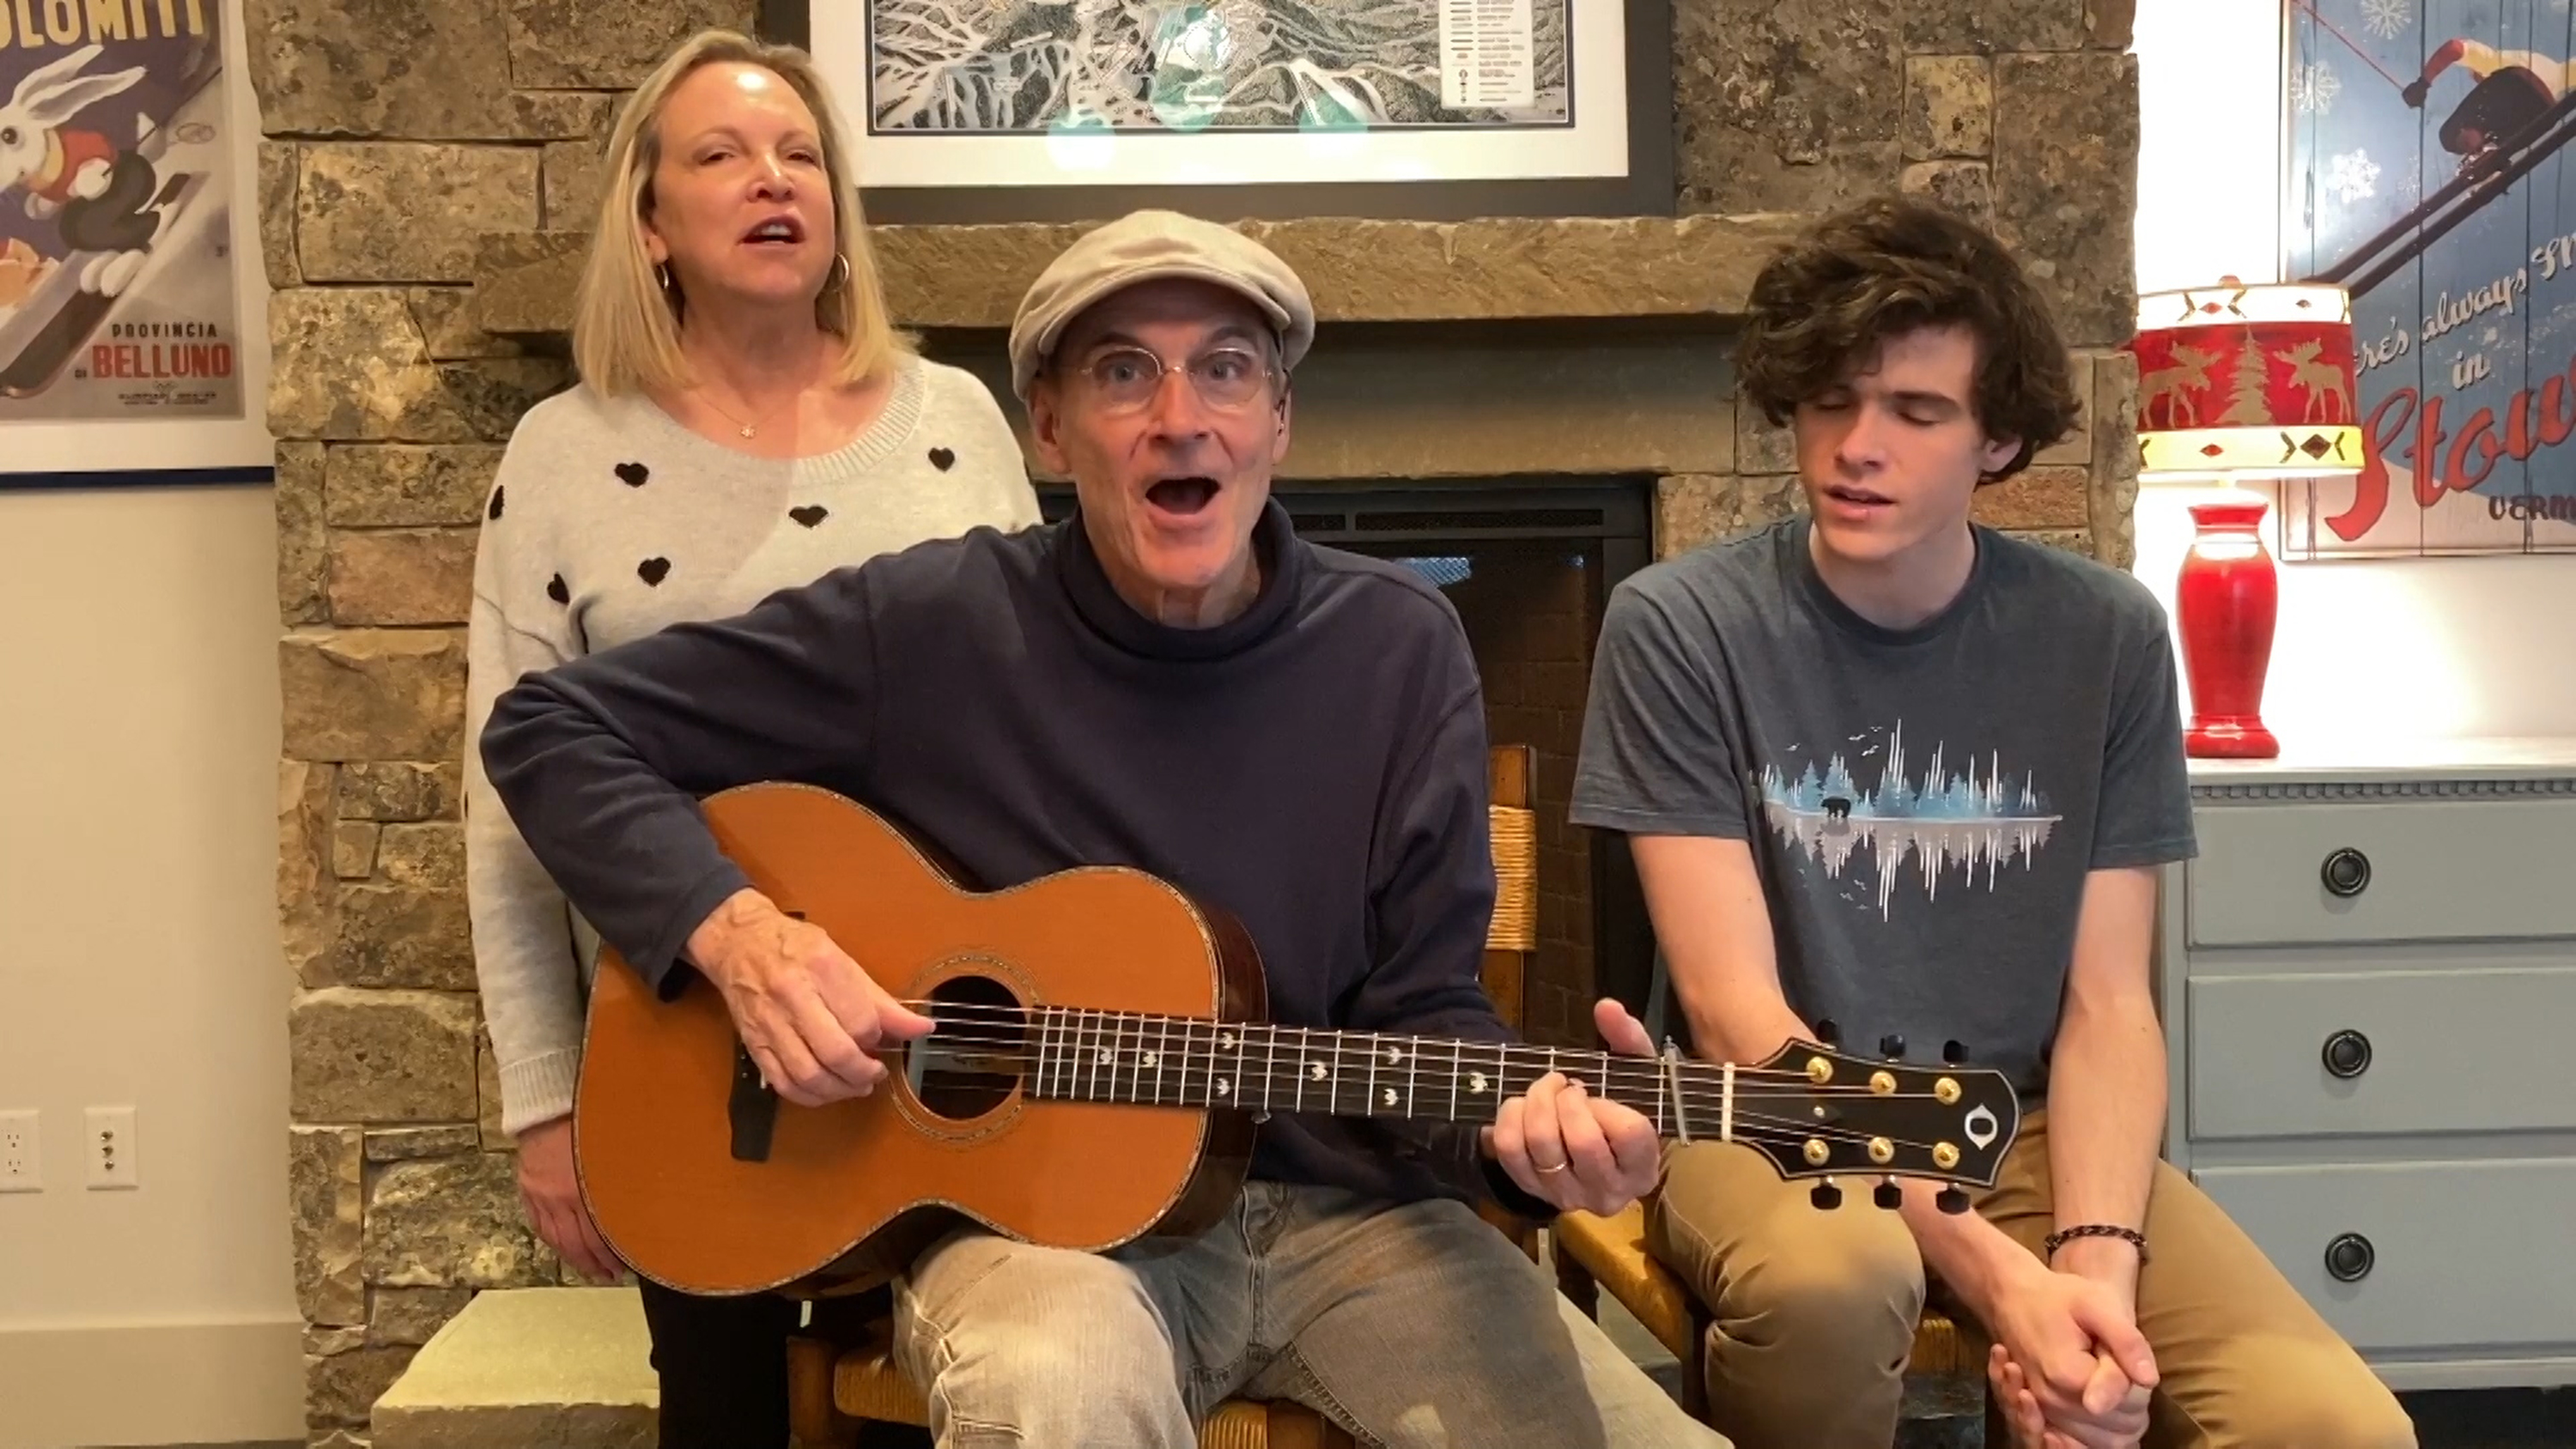 James Taylor performs with wife Catherine "Kim" Smedvig and their son Henry on May 7, 2020, on Season 7 of "The Tonight Show Starring Jimmy Fallon" | Source: Getty Images